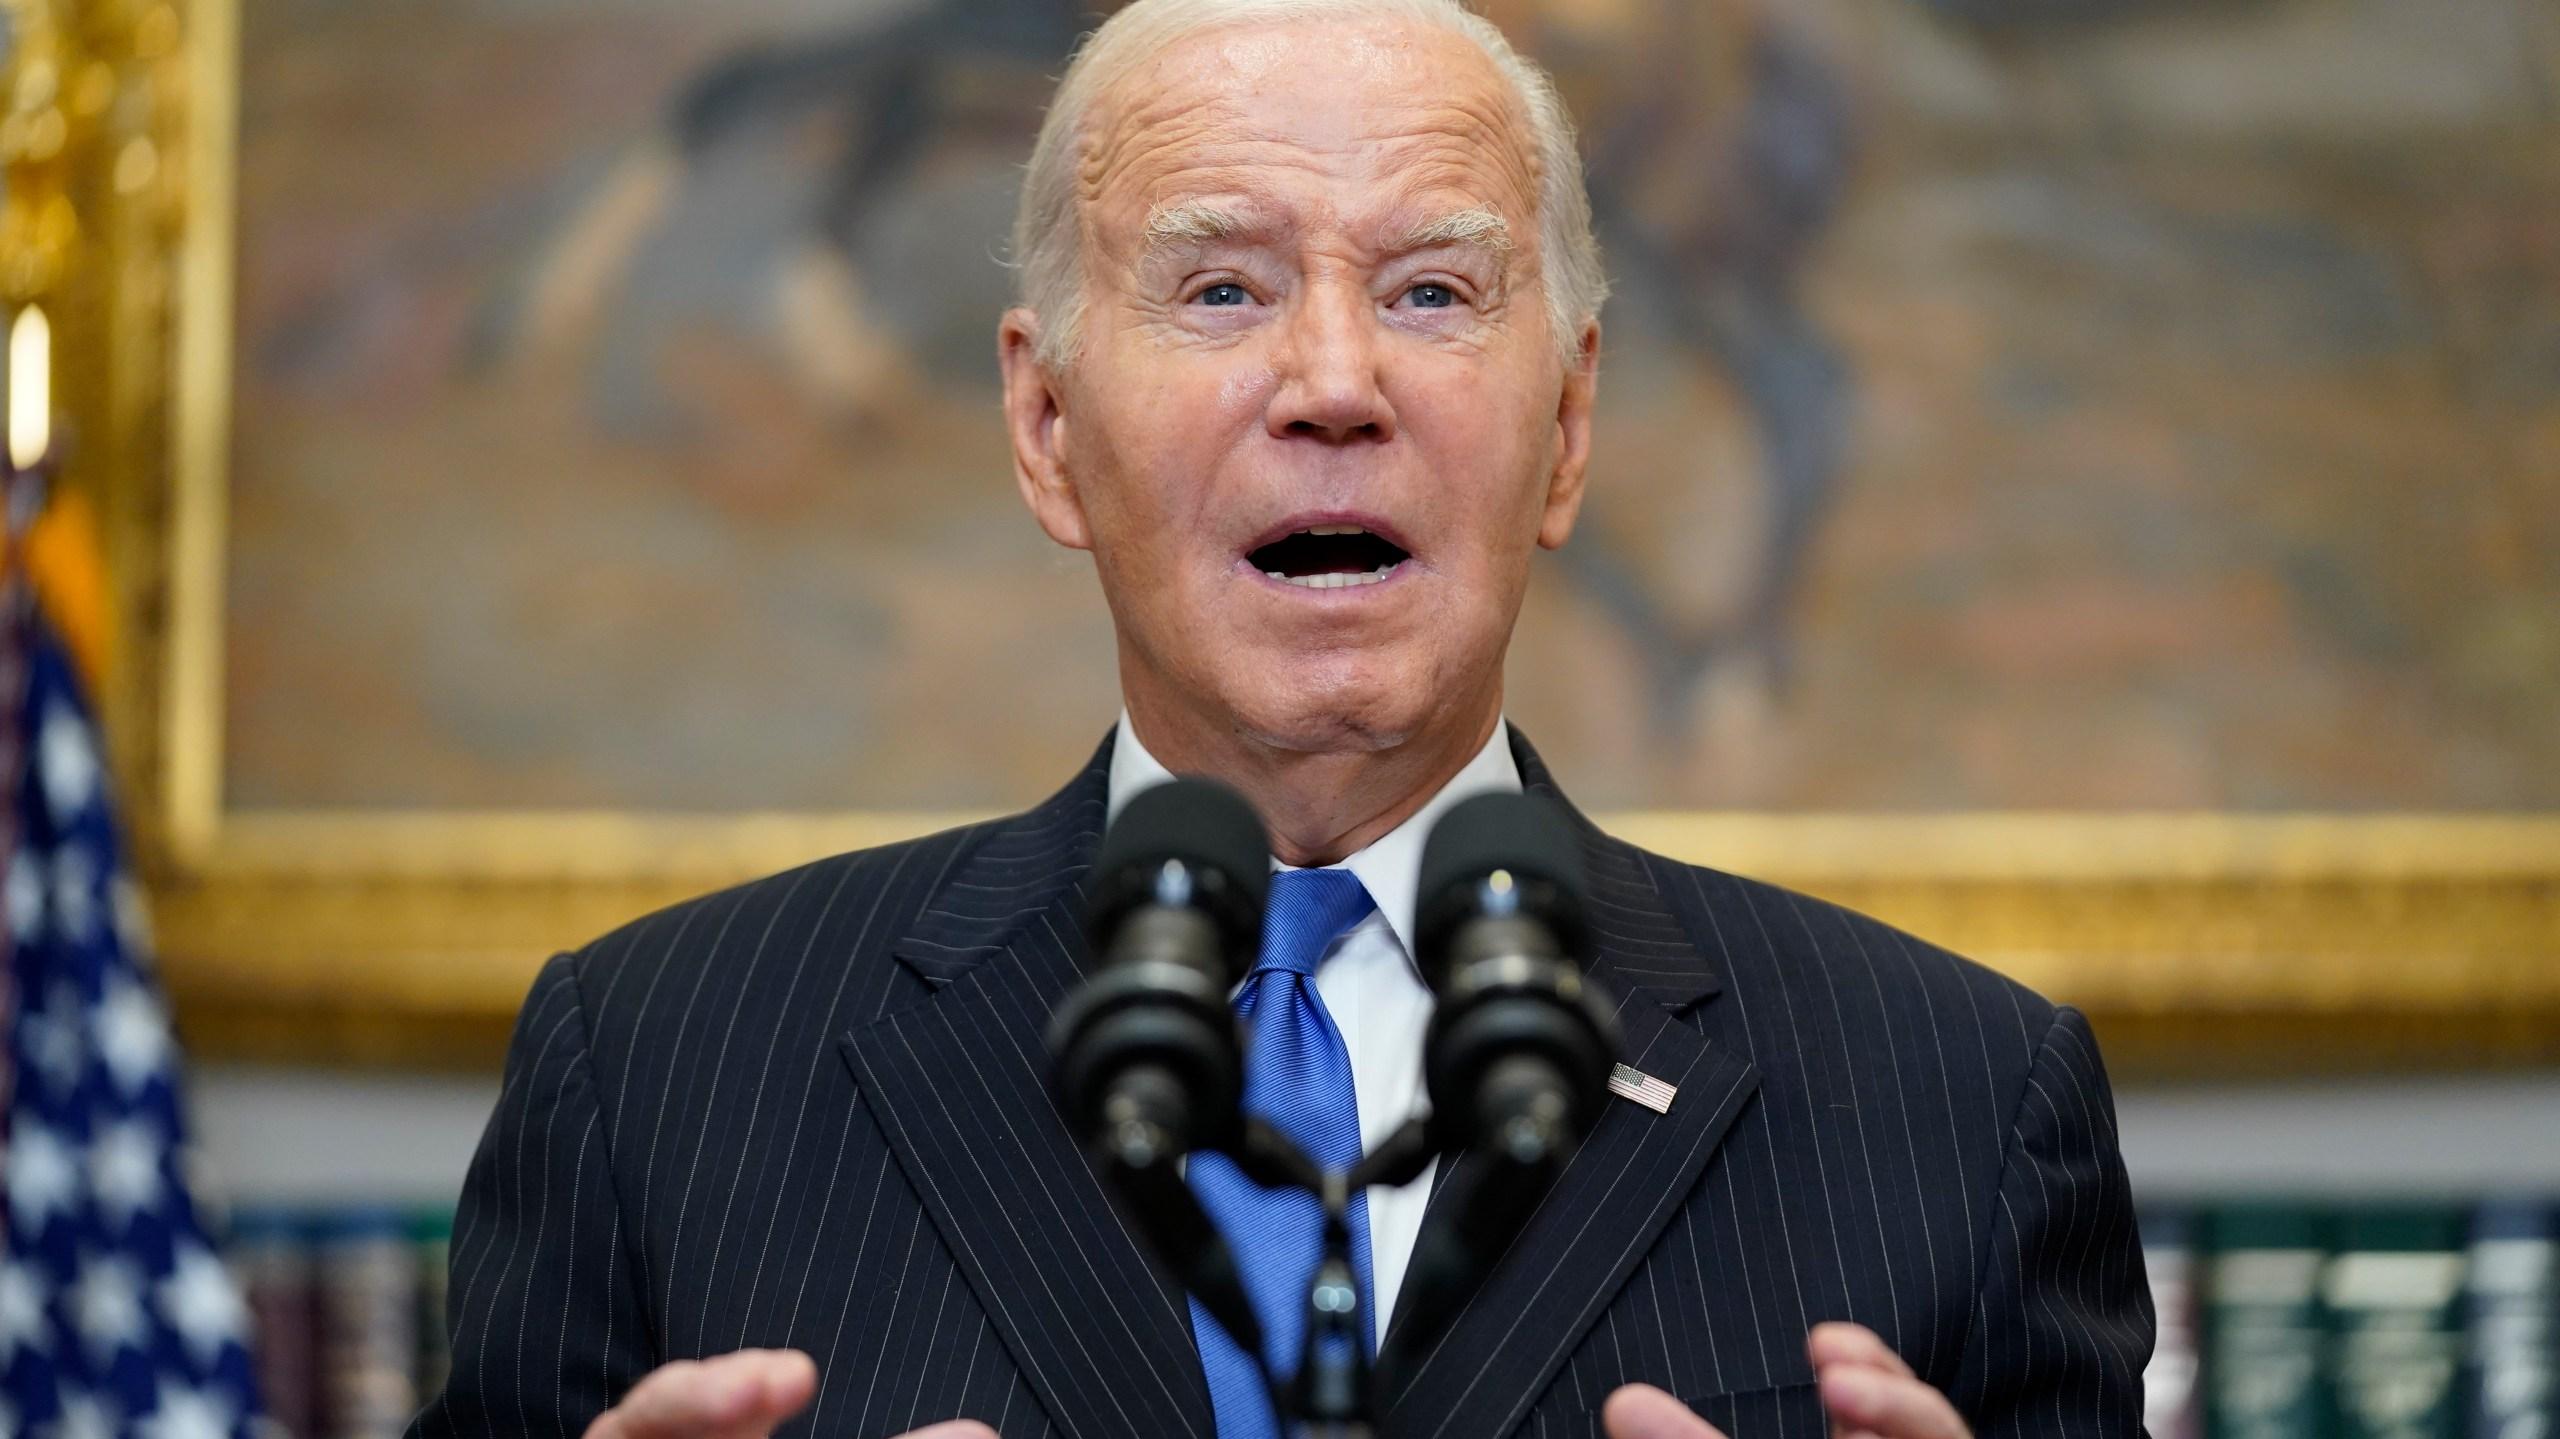 Biden faces more criticism about the US Mexico border one of his